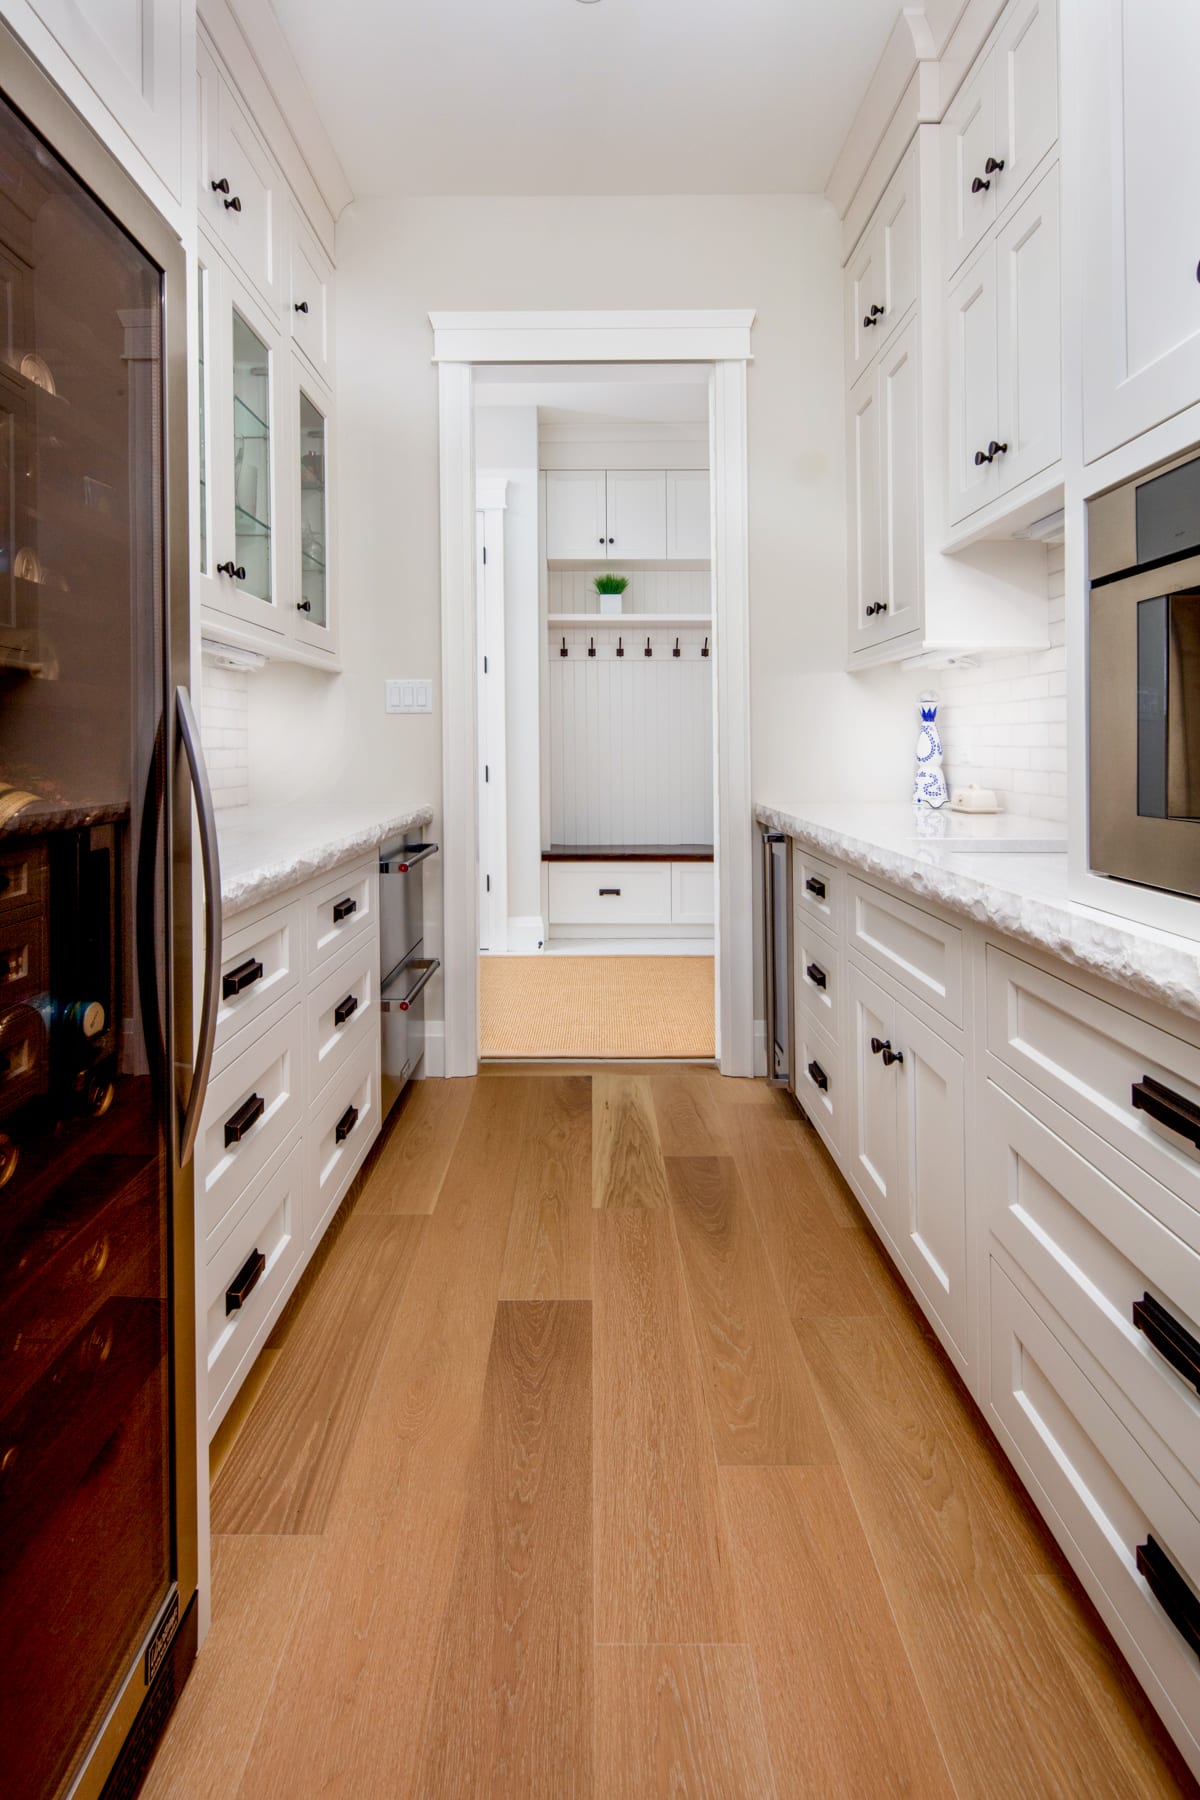 A traditional butlers pantry with white cabinetry and rustic details